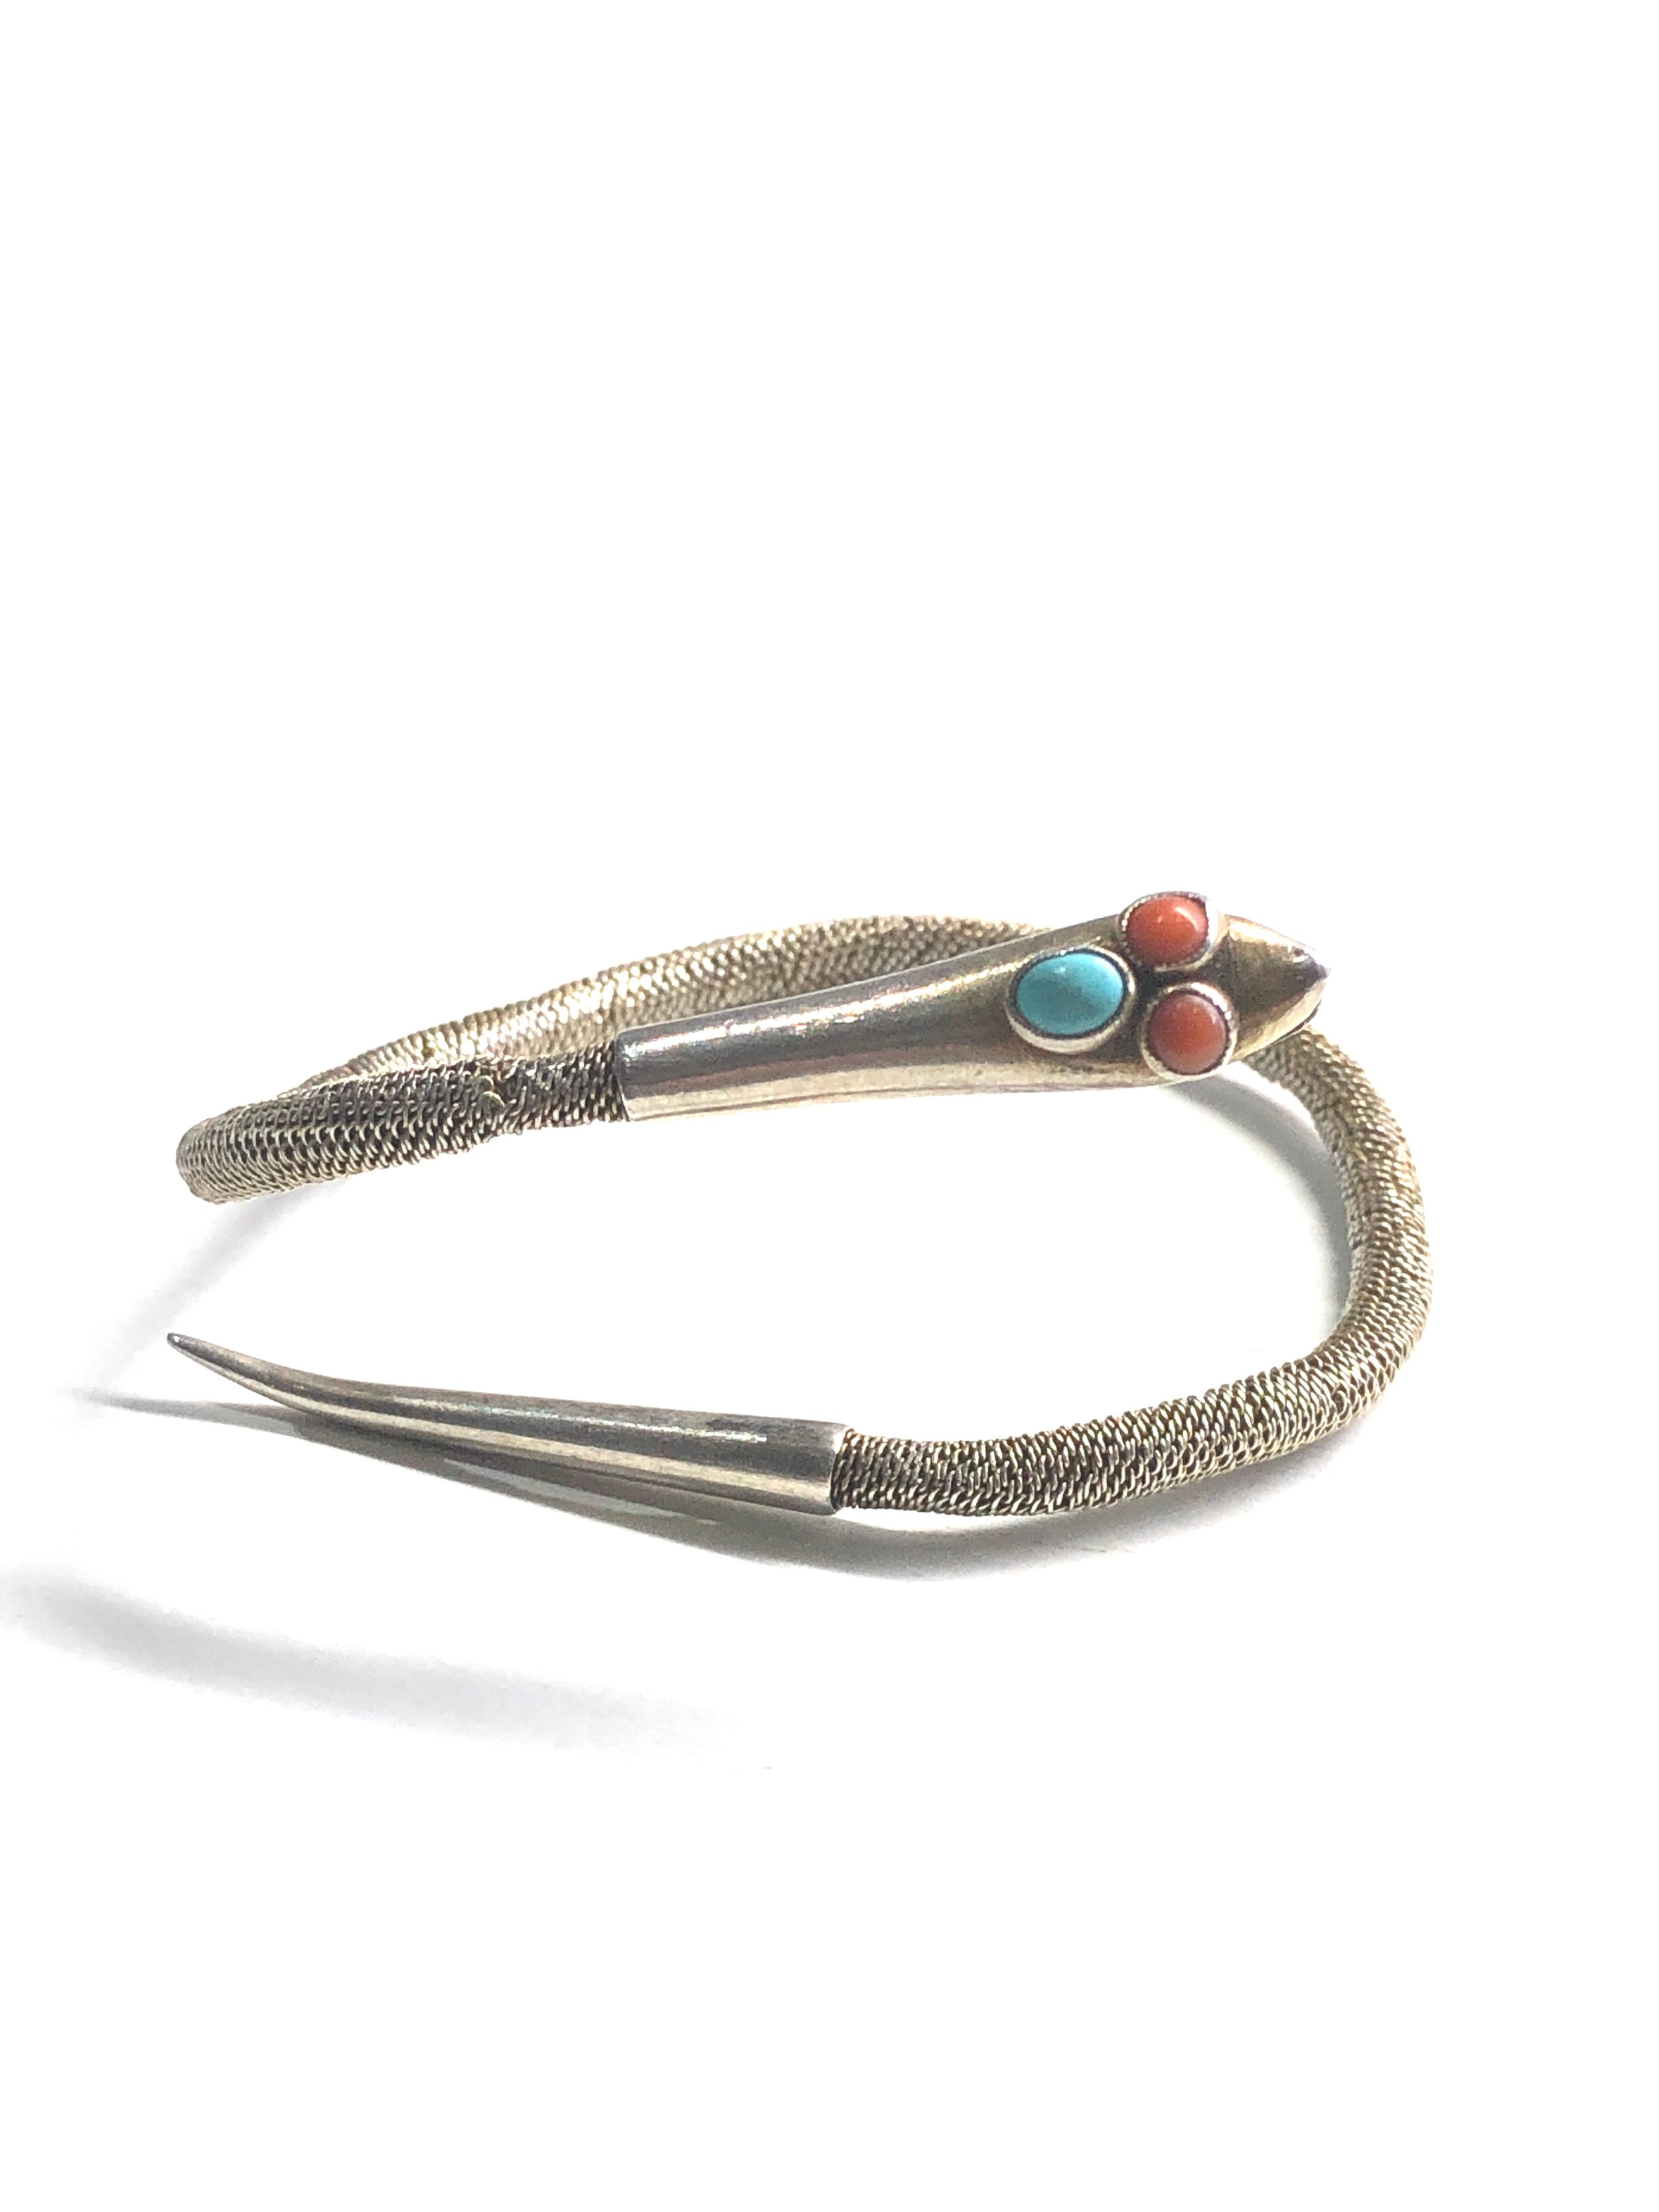 Antique silver turquoise & coral snake bangle - Image 2 of 3